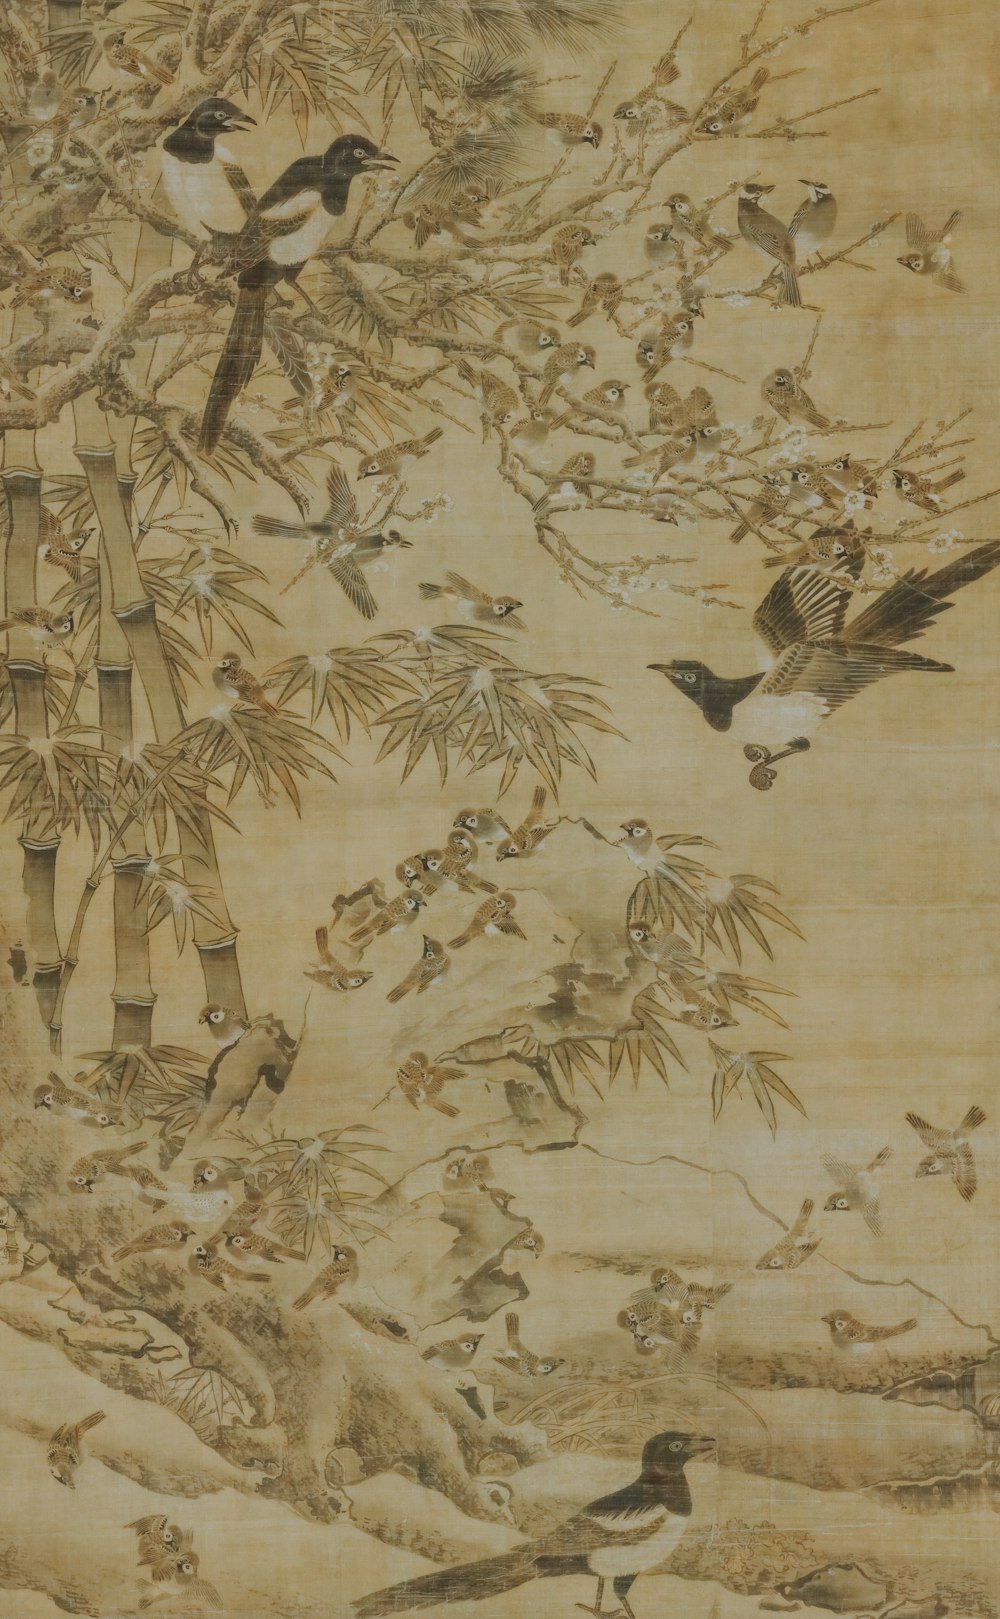 a painting of birds on a bamboo tree